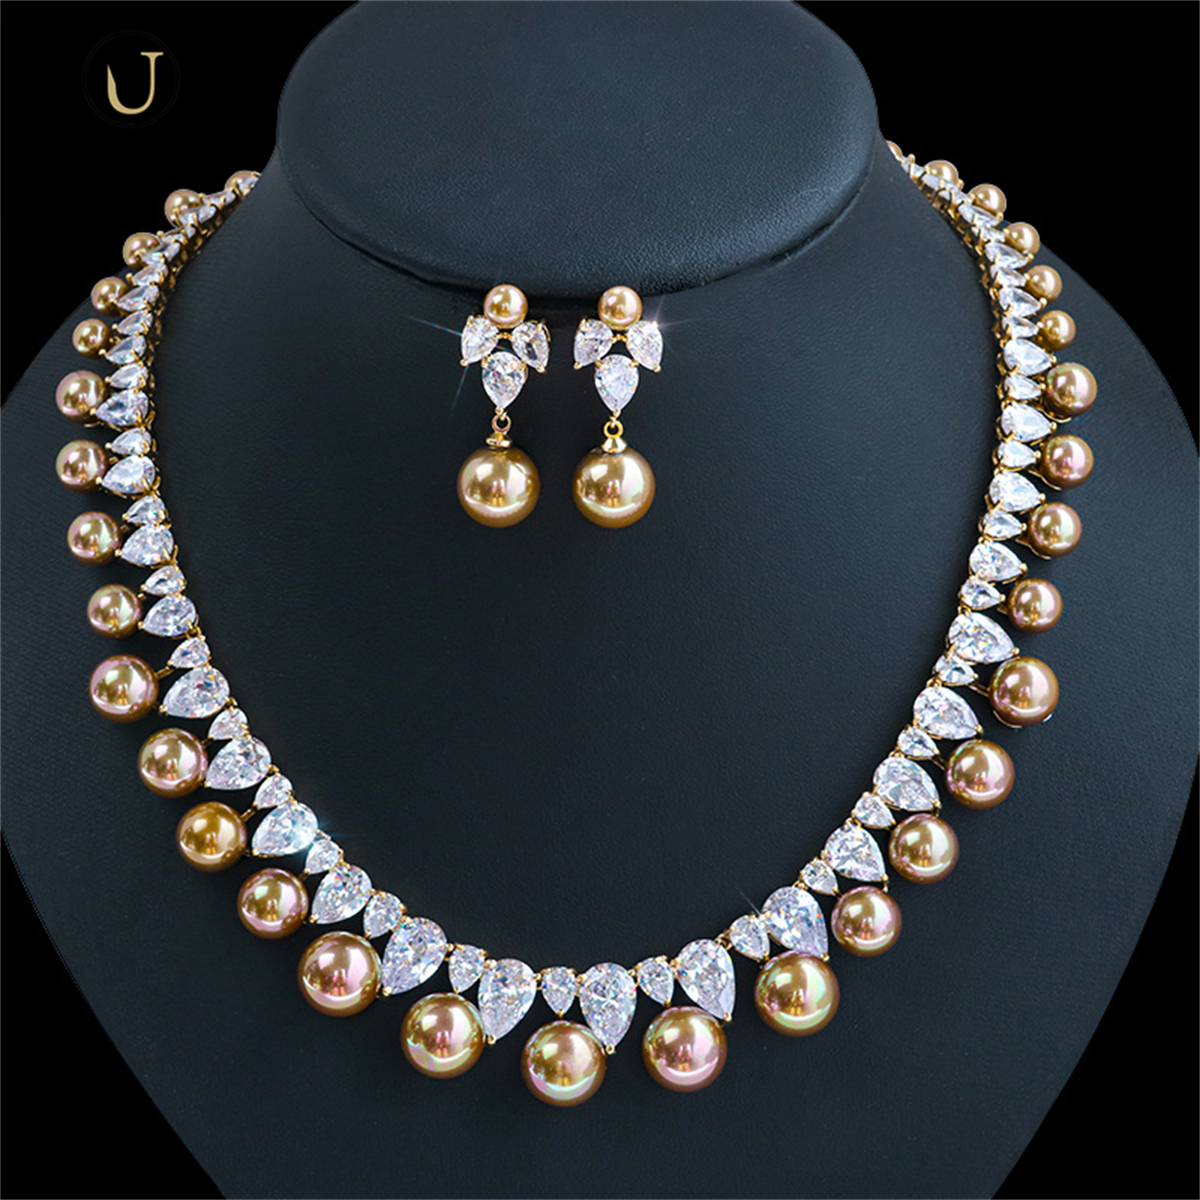 Votum s925 Sterling Silver Gold Plated Freshwater Pearl Moissanite Necklace Dangle Earring Jewelry Set for Wedding Party